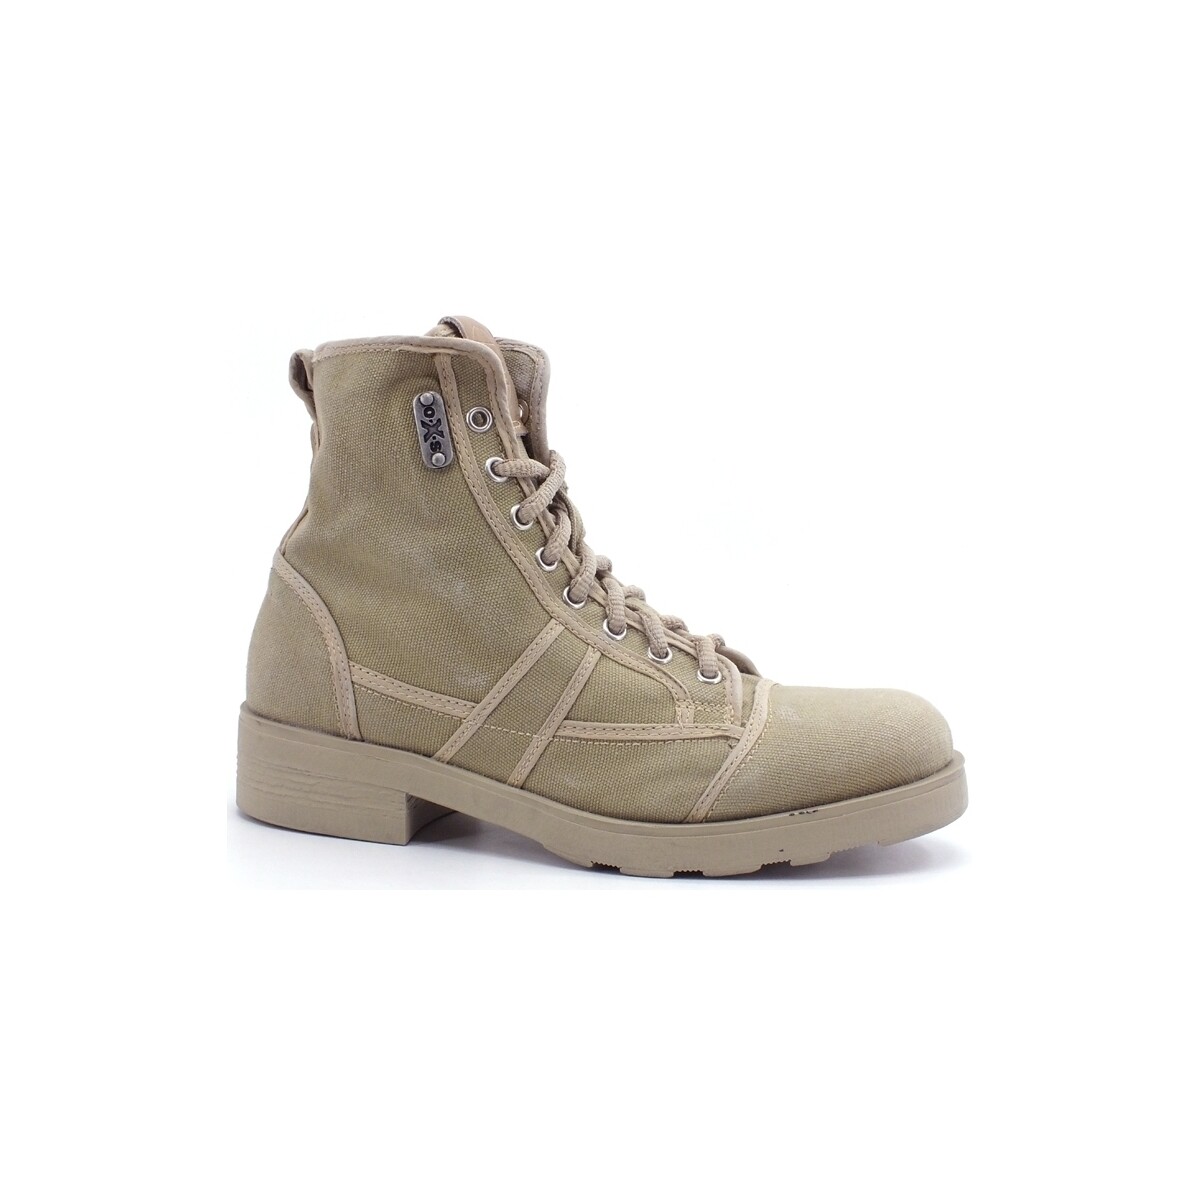 Chaussures Femme Bottes OXS Frank 1000 Mid W Anfibio Stivaletto Taupe OXS9U1020DT42CXK Beige